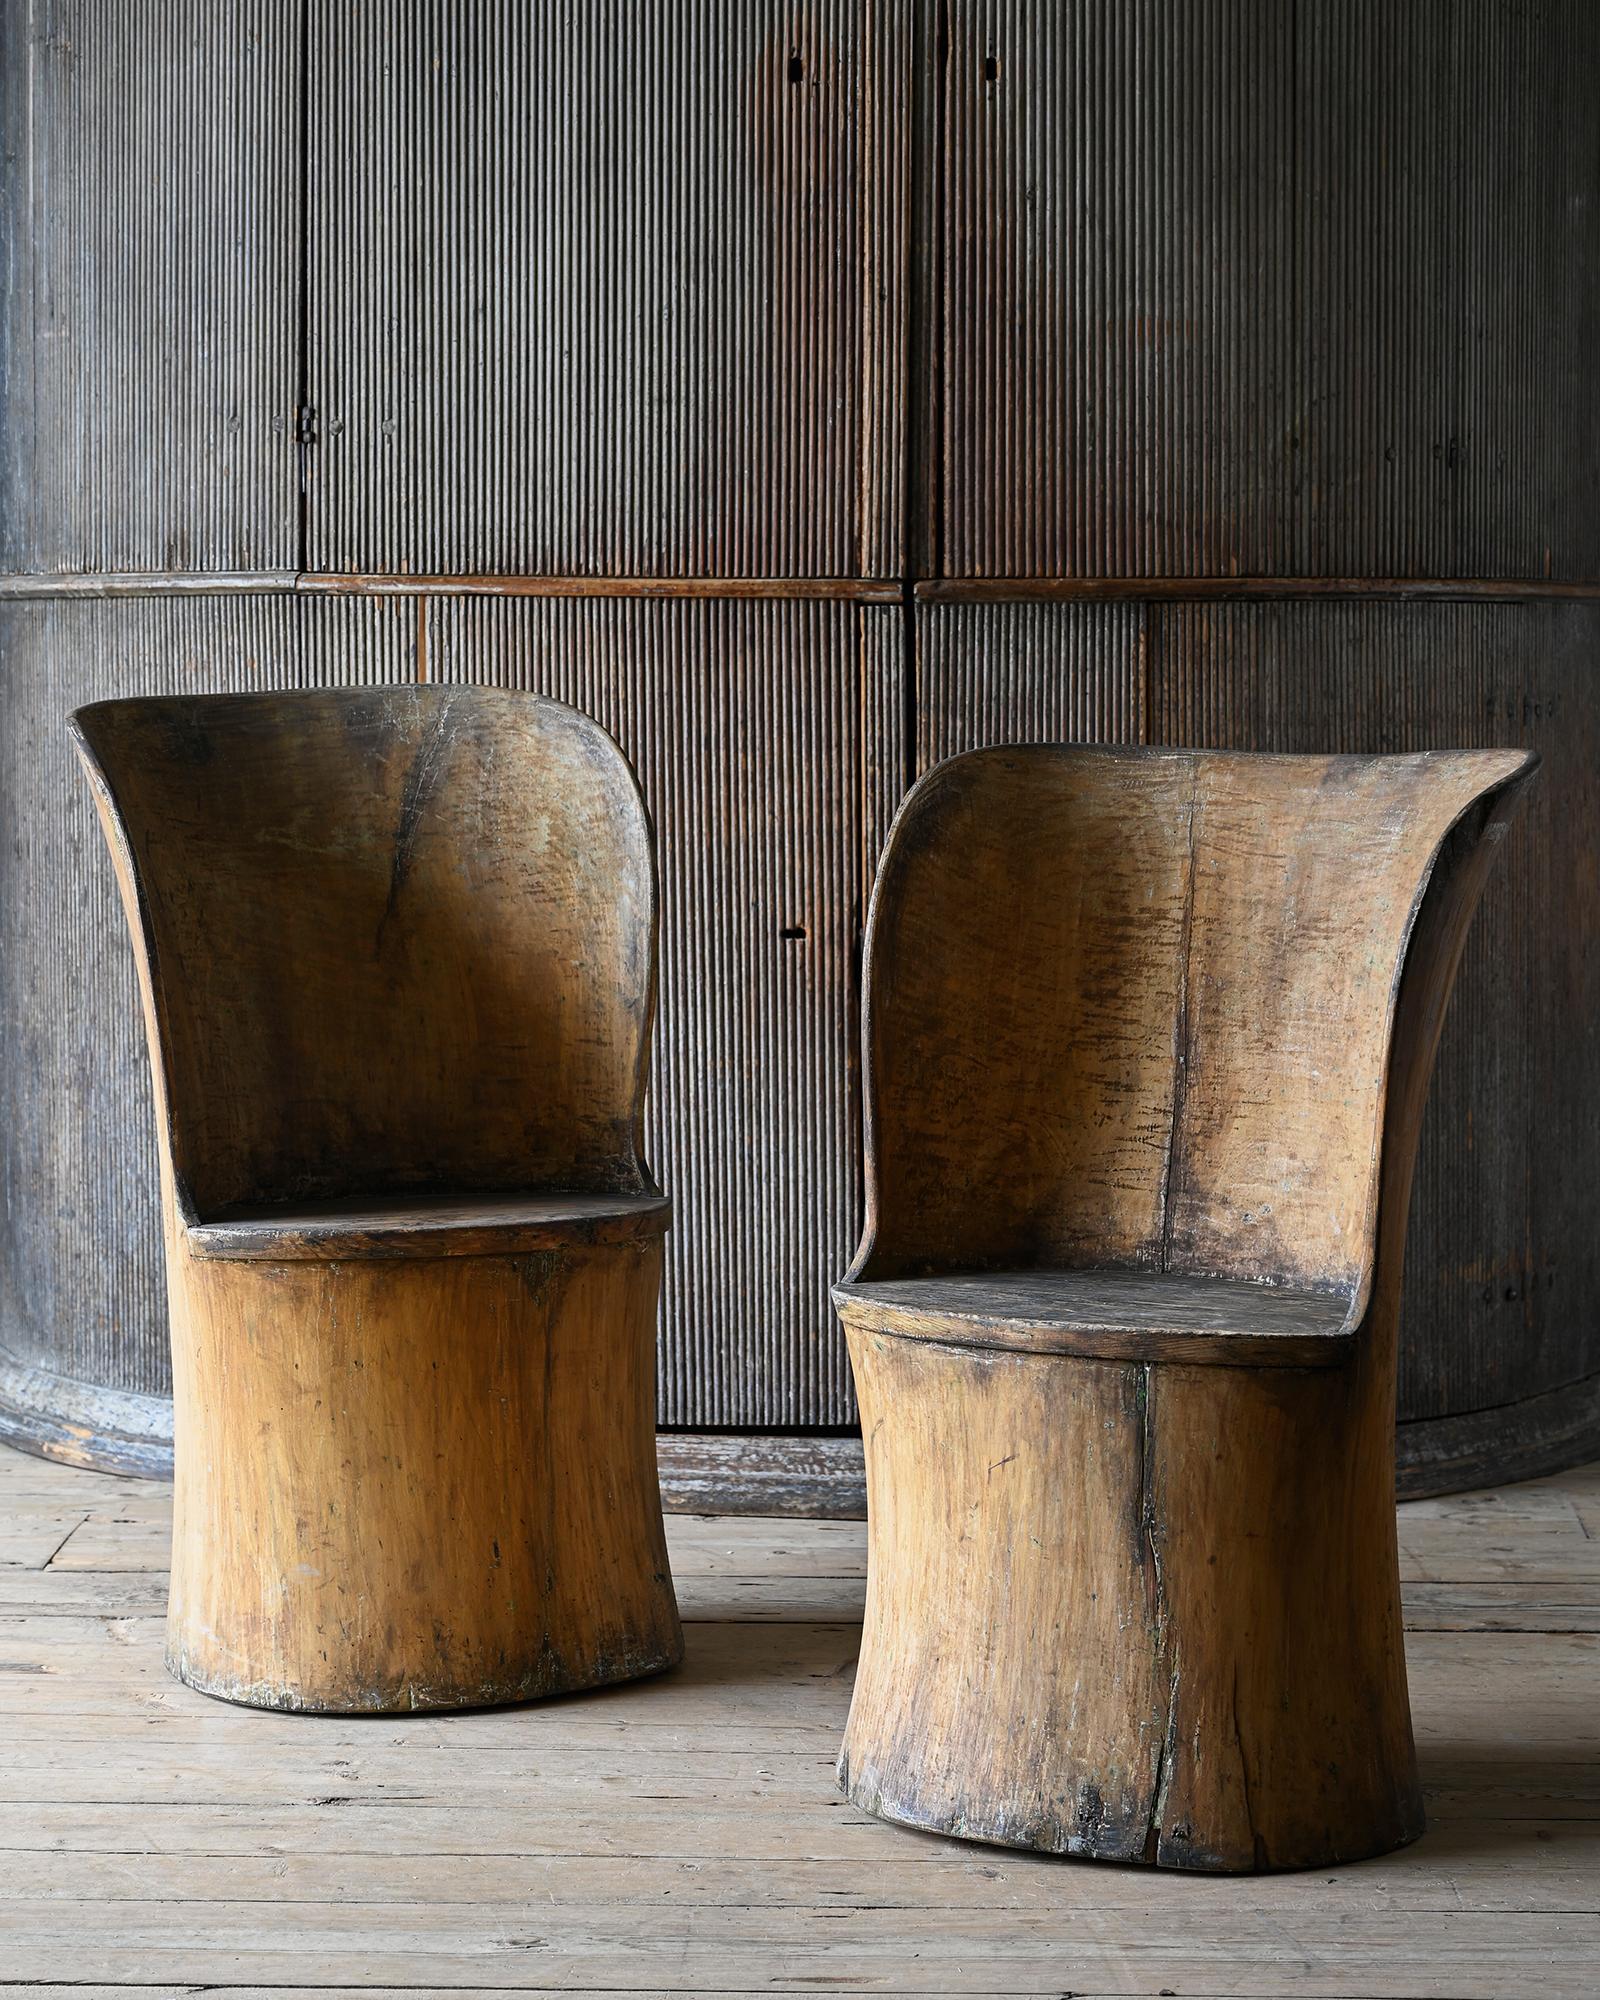 fine and rare pair of 19th century Swedish Folk Art log chairs in their original condition and great proportions and shape, circa 1810 Sweden.